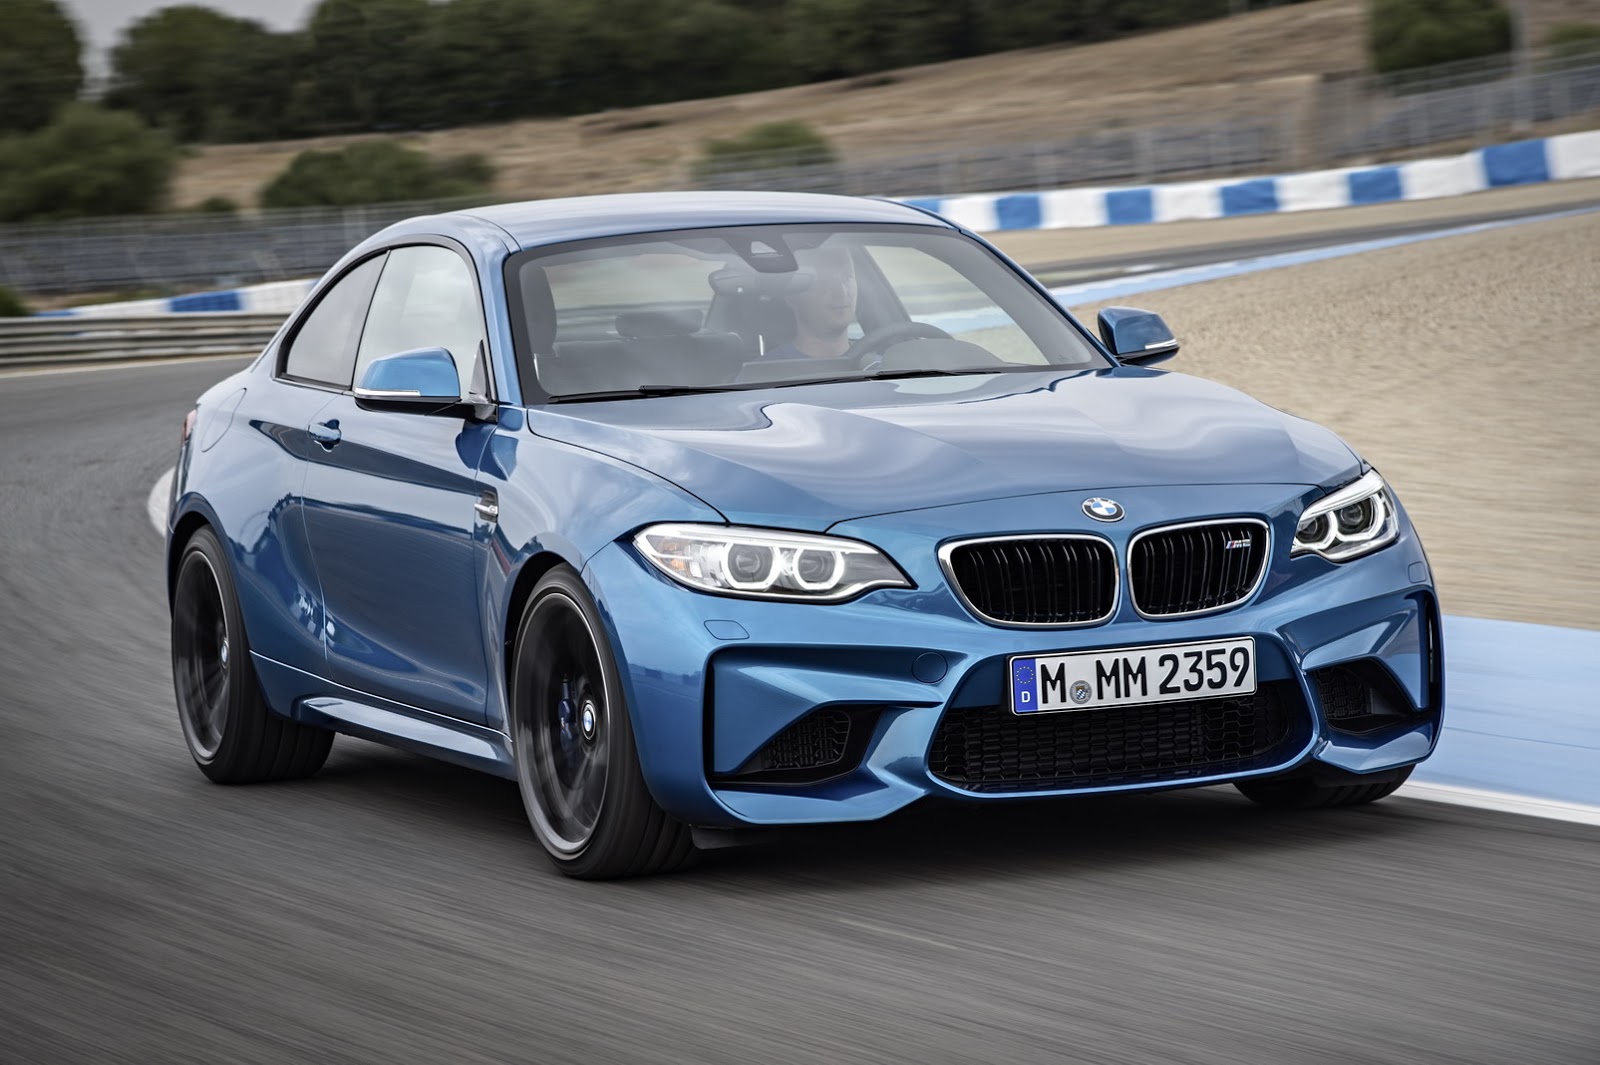 BMW M2 Coupe HD wallpapers, Desktop wallpaper - most viewed